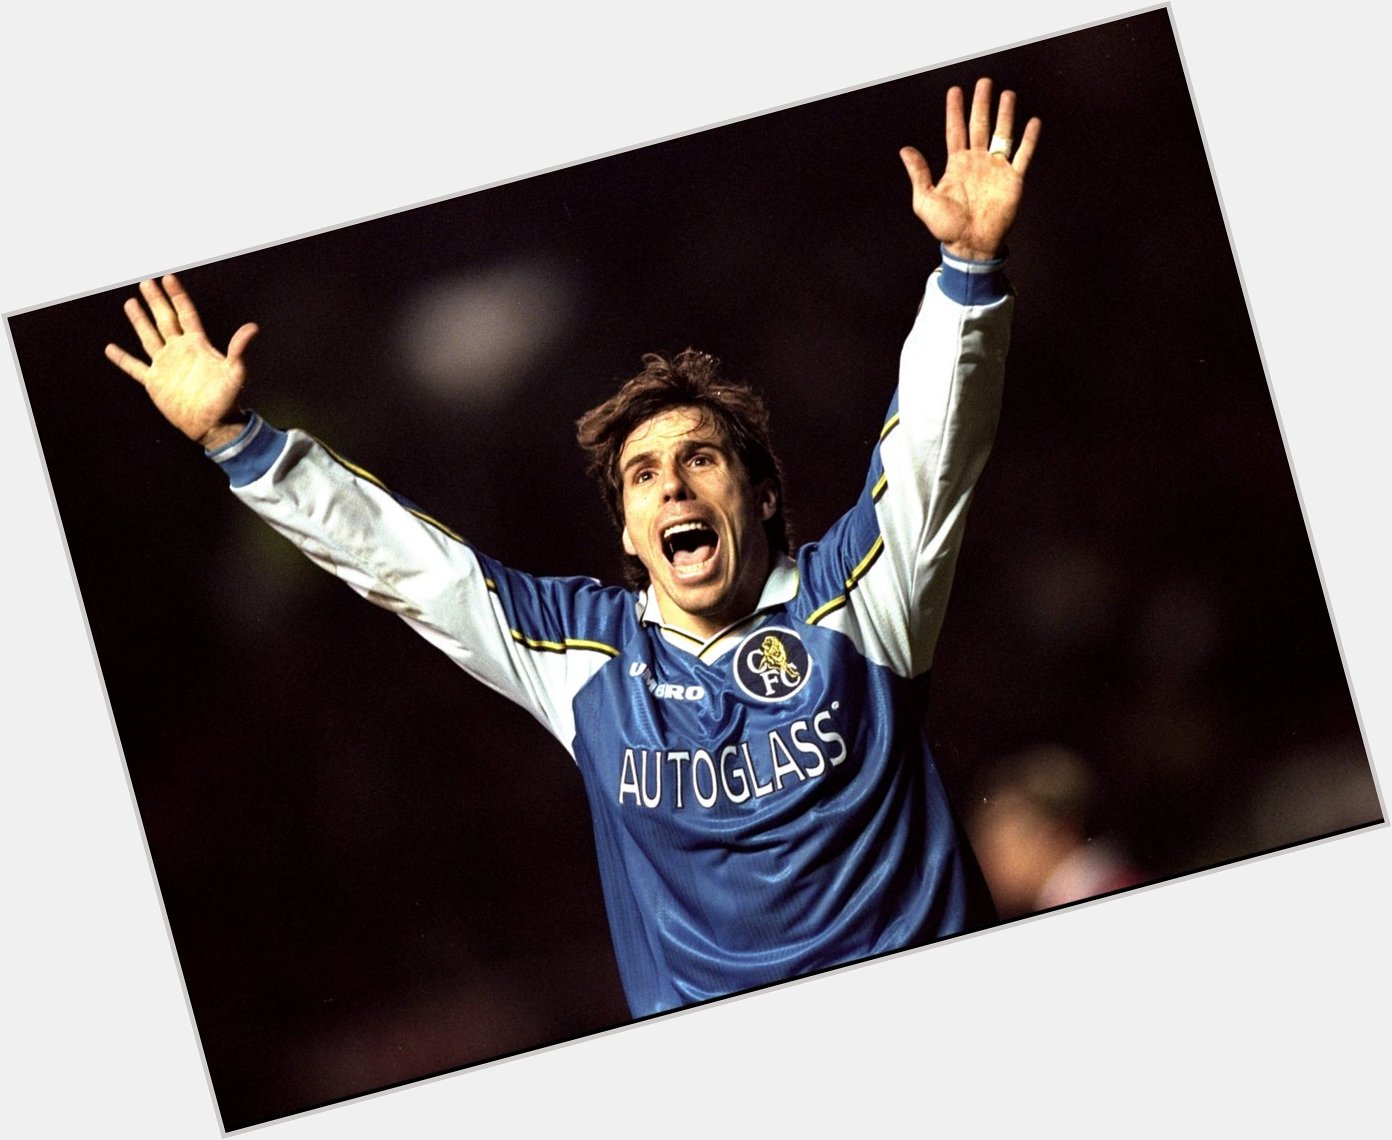 Happy 55th Birthday, Gianfranco Zola!   229 Games for Chelsea 59 Goals  42 Assists

A little magician 